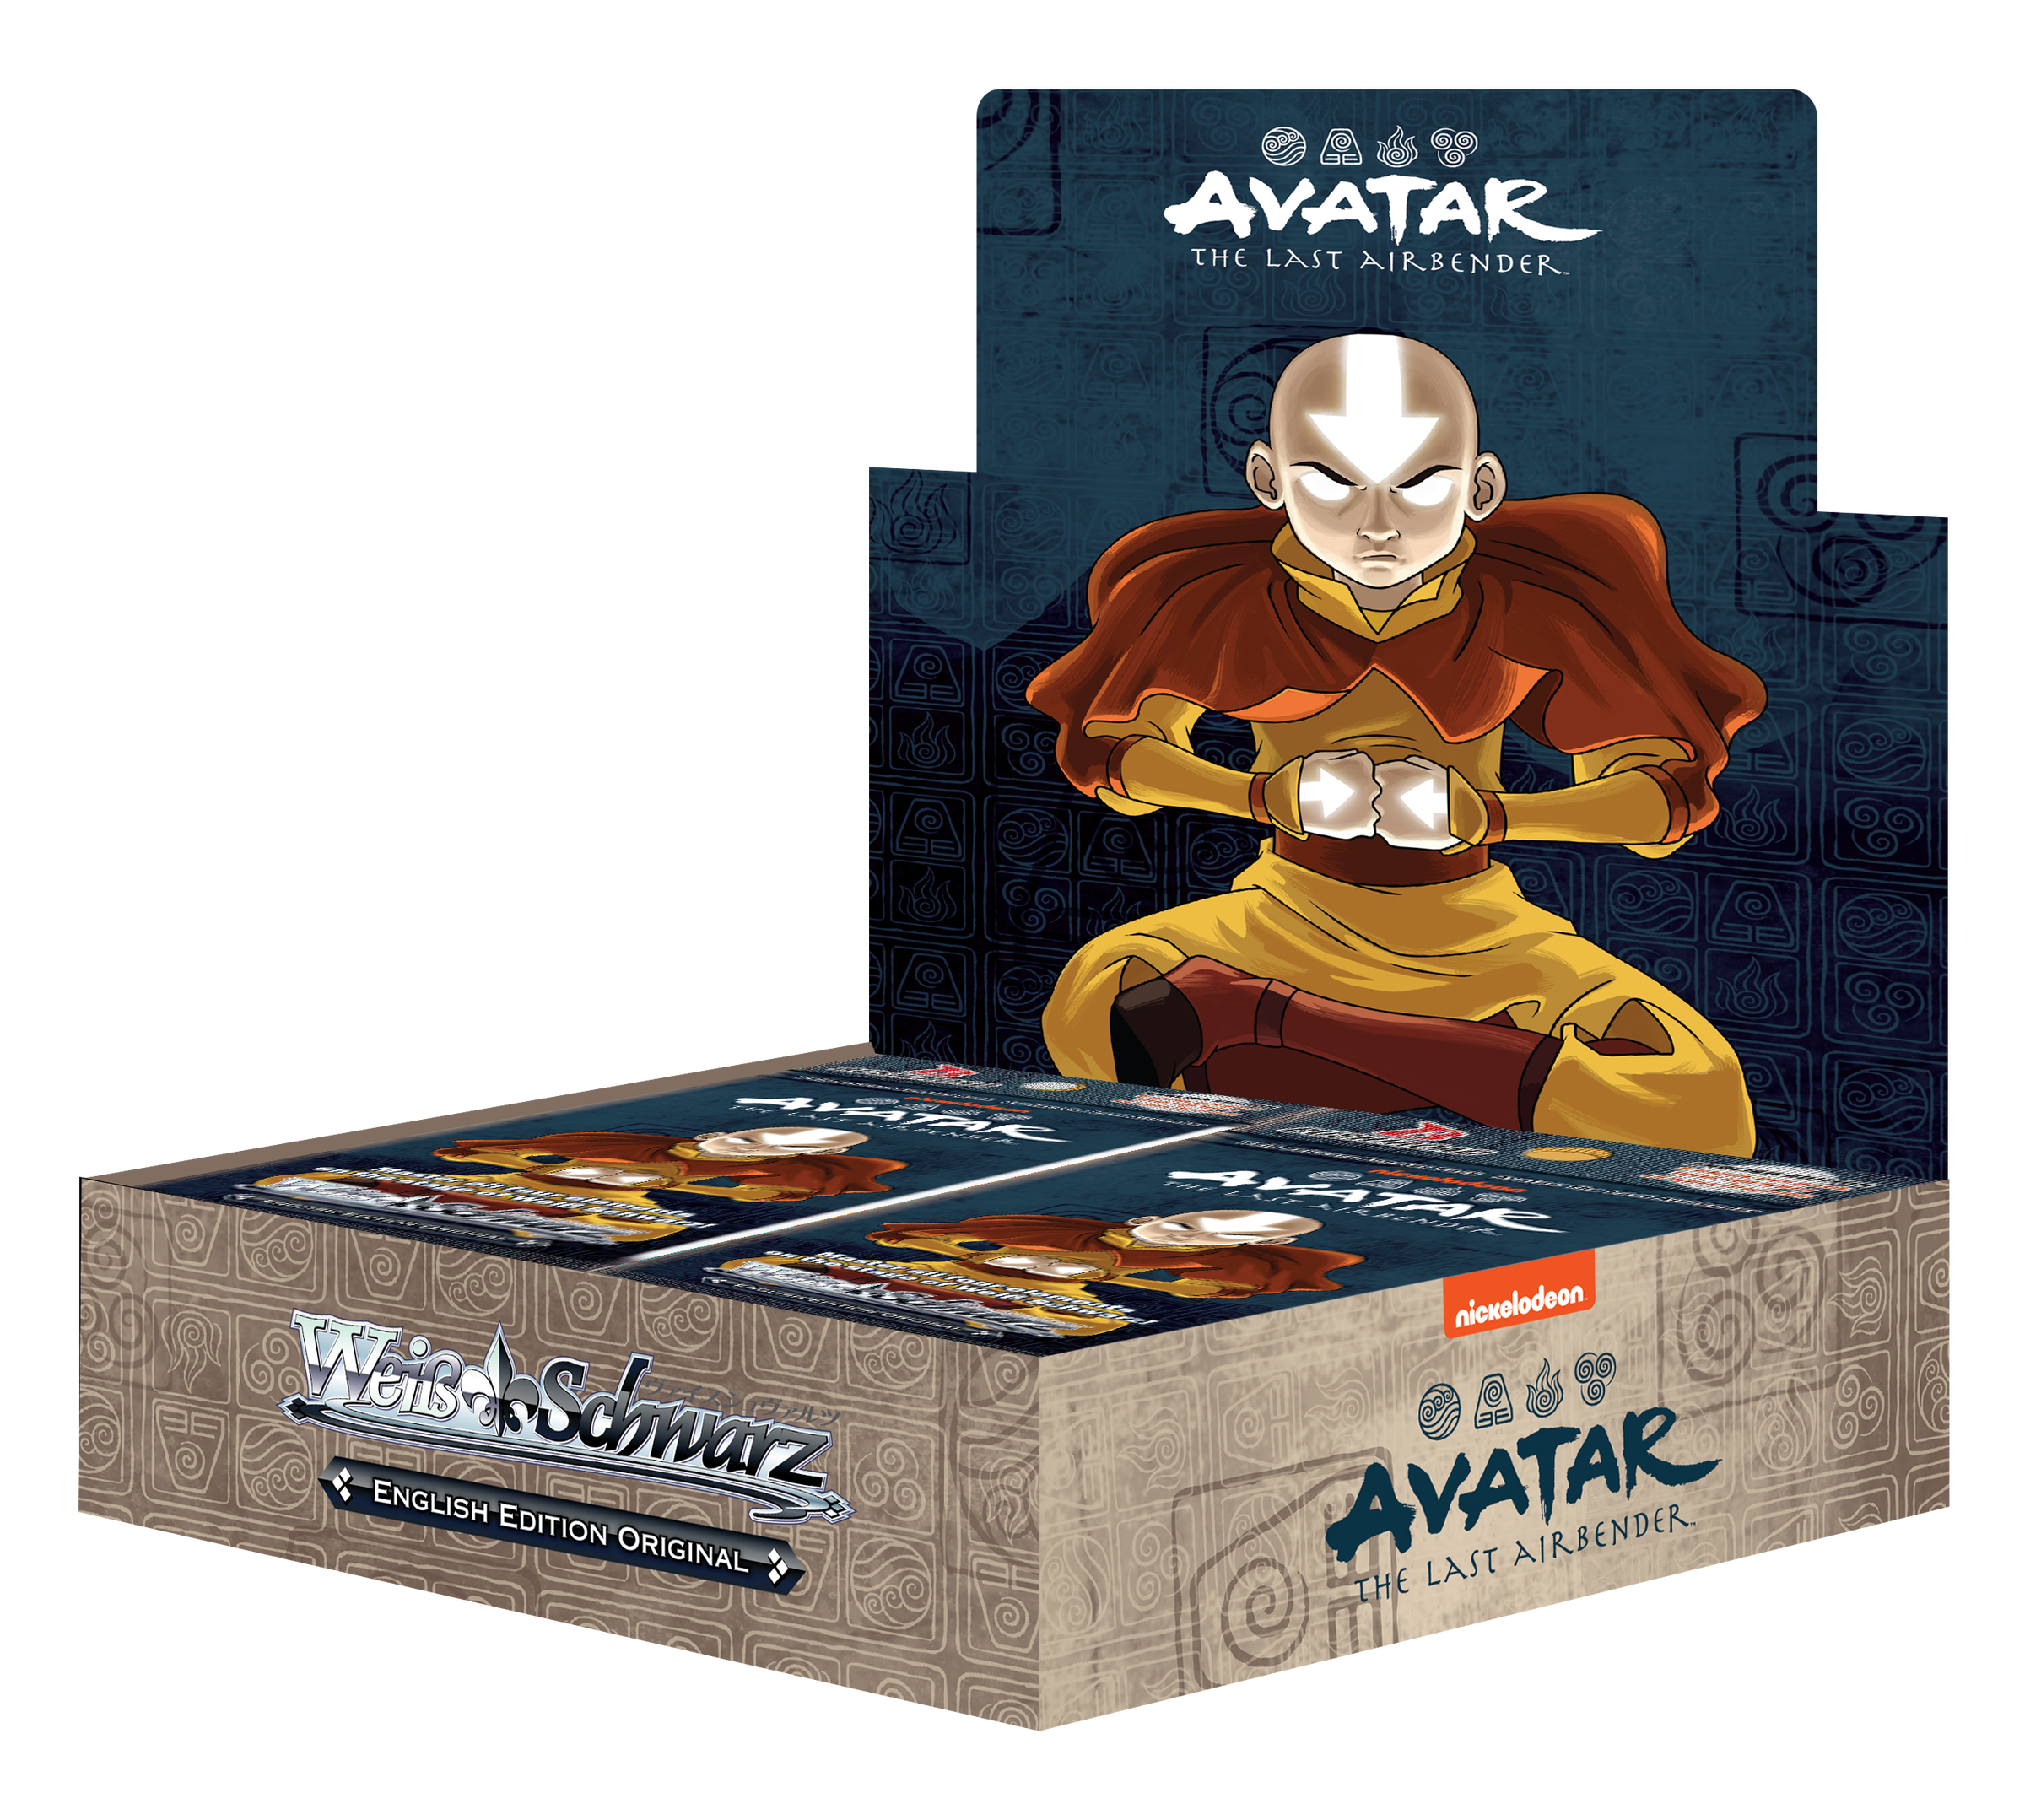 Avatar: The Last Airbender Booster Box